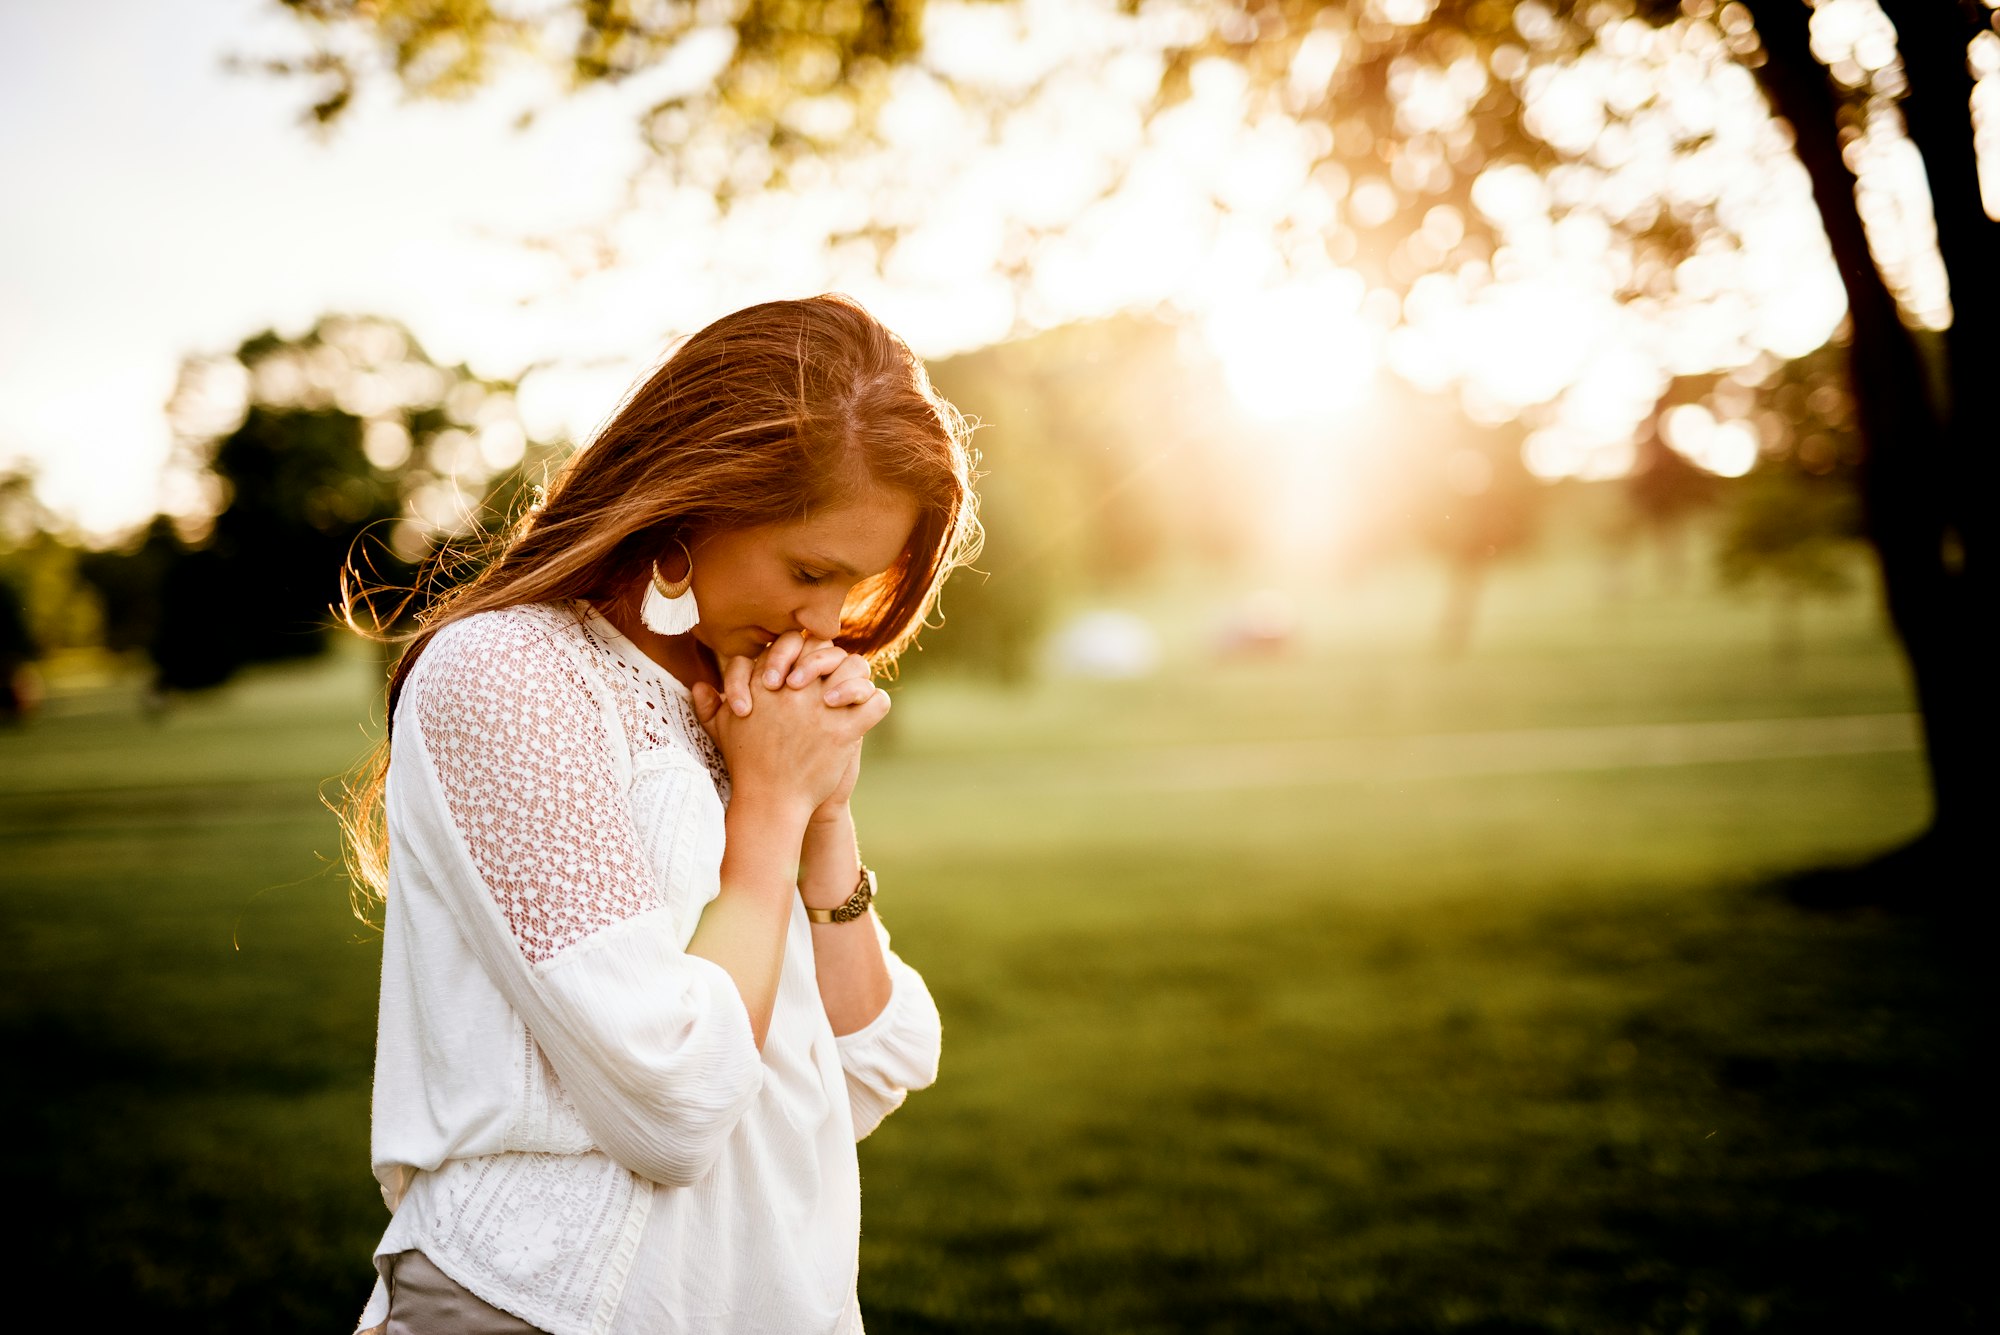 5 Ways to Pray More Powerfully for Instant Miracles